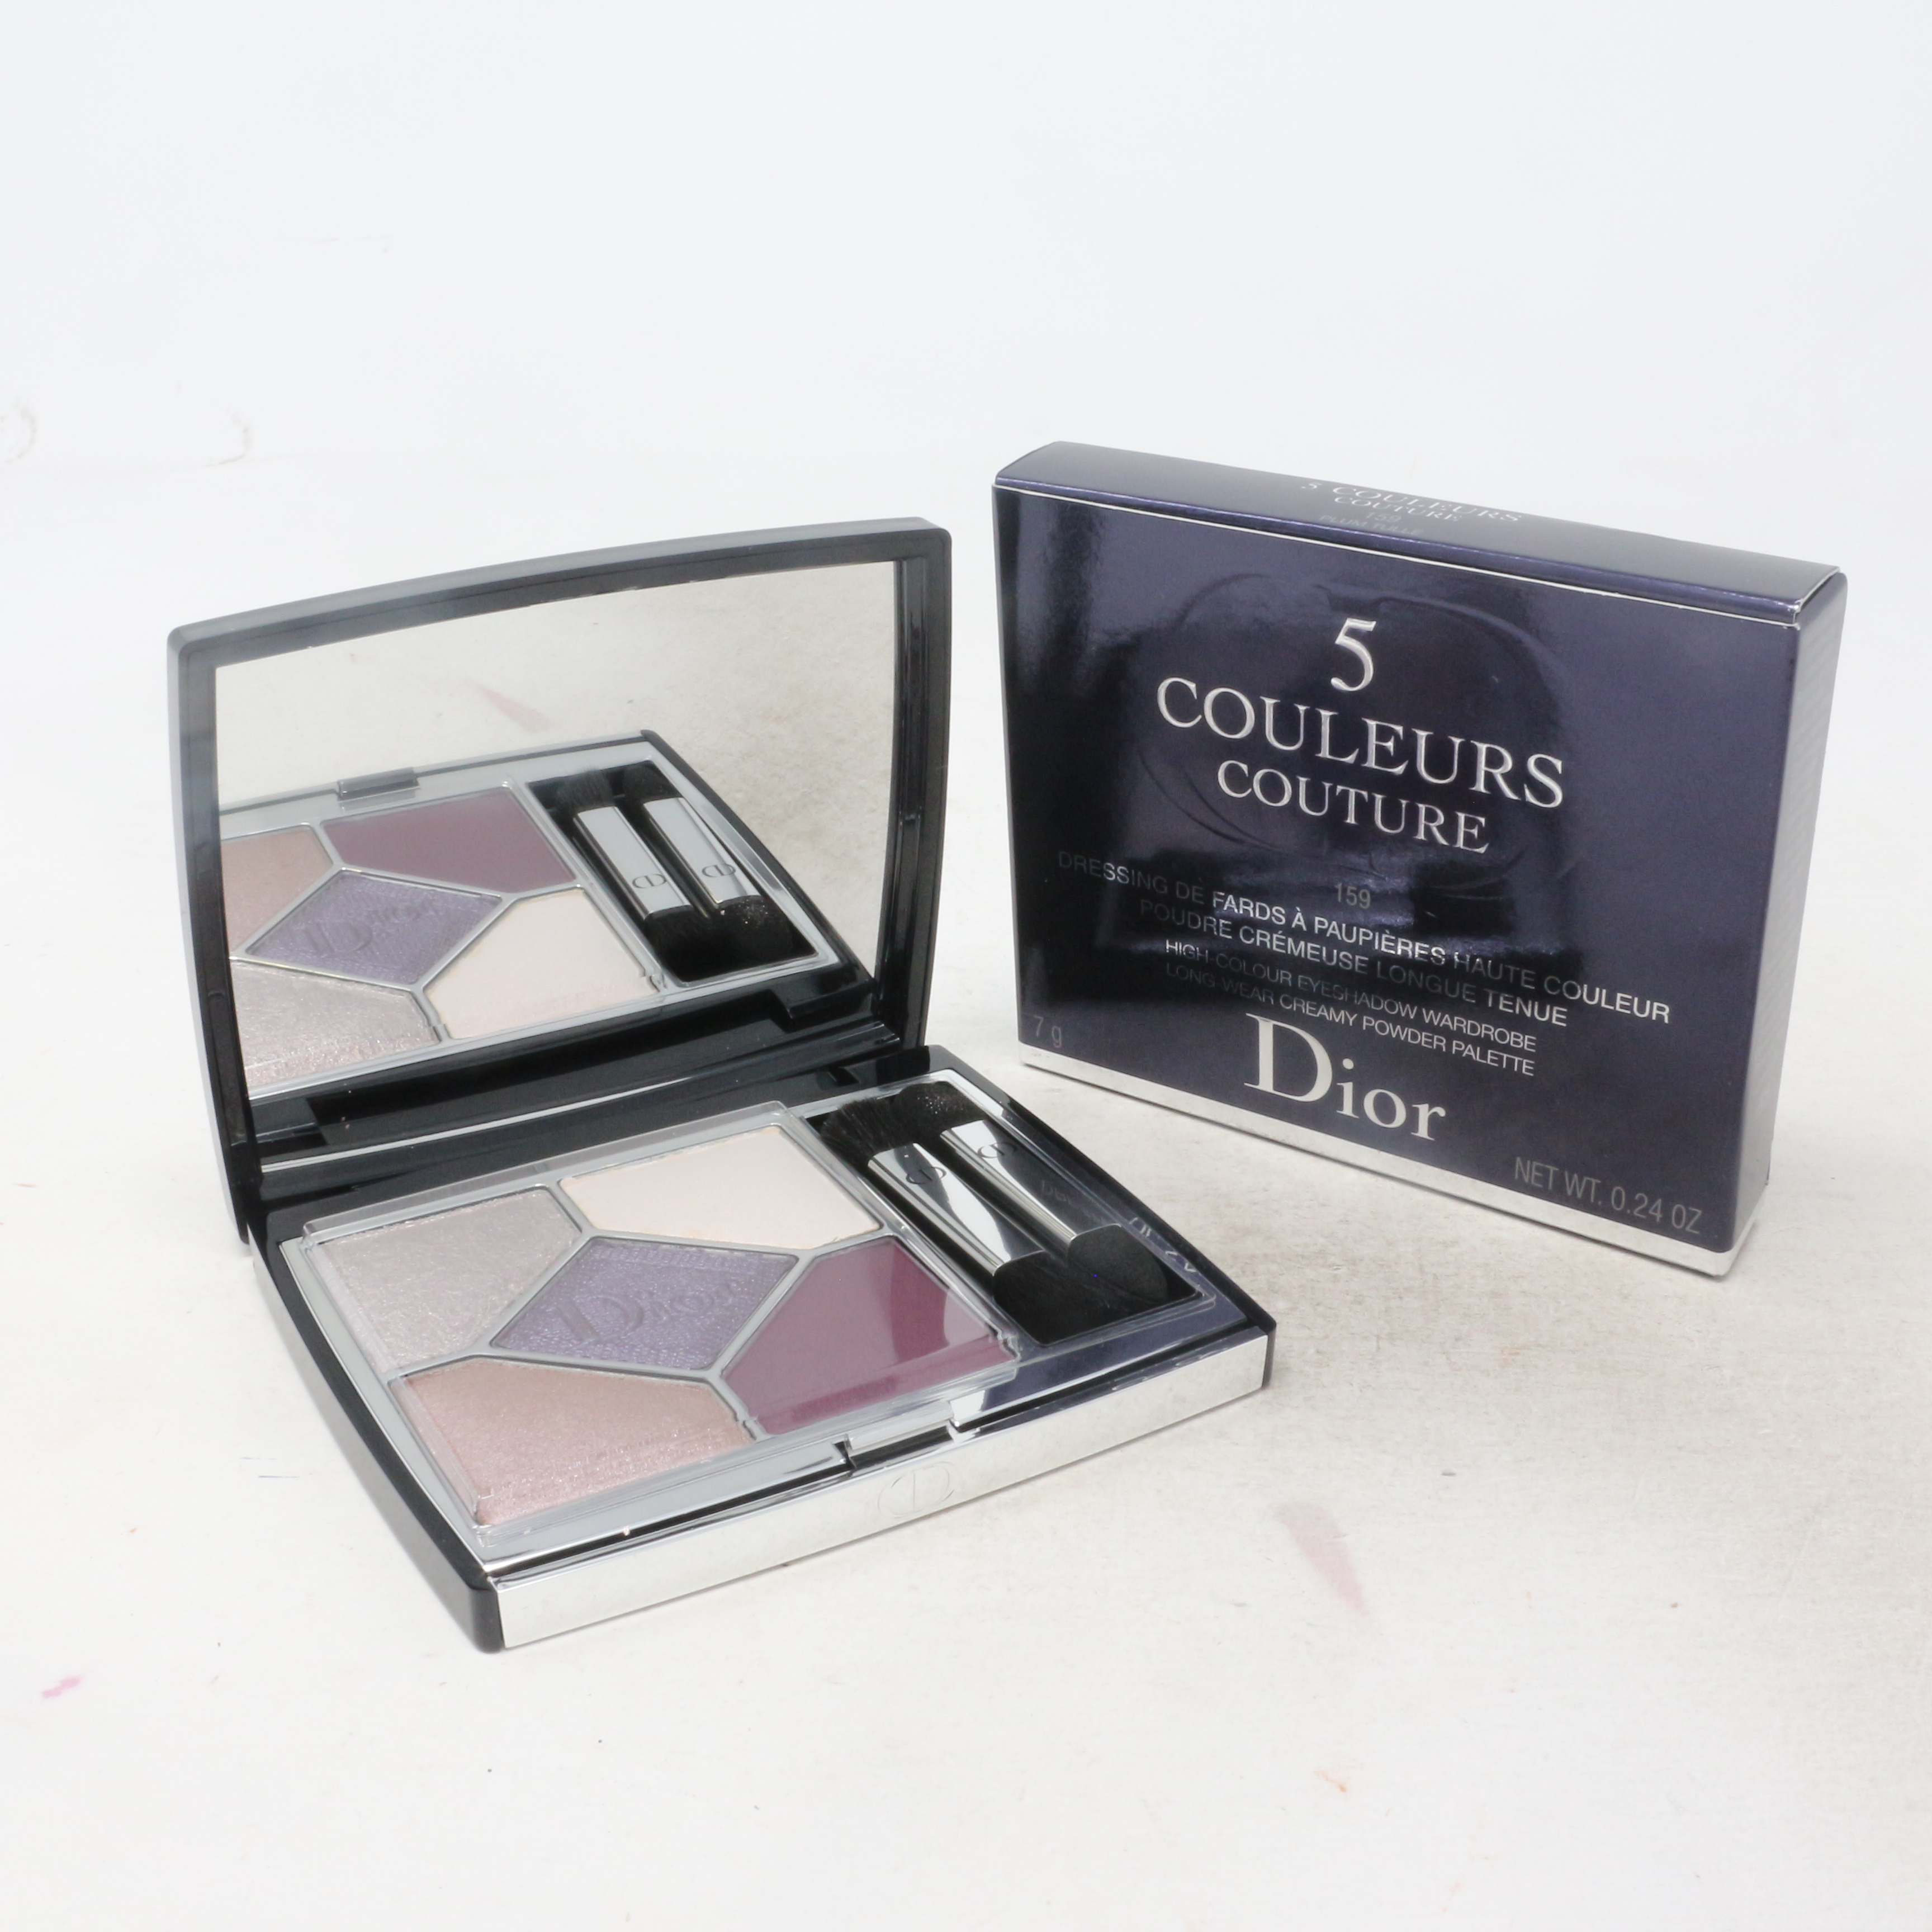 Dior 5 Couleurs Eyeshadow Palette 0.24oz/7g New With Box